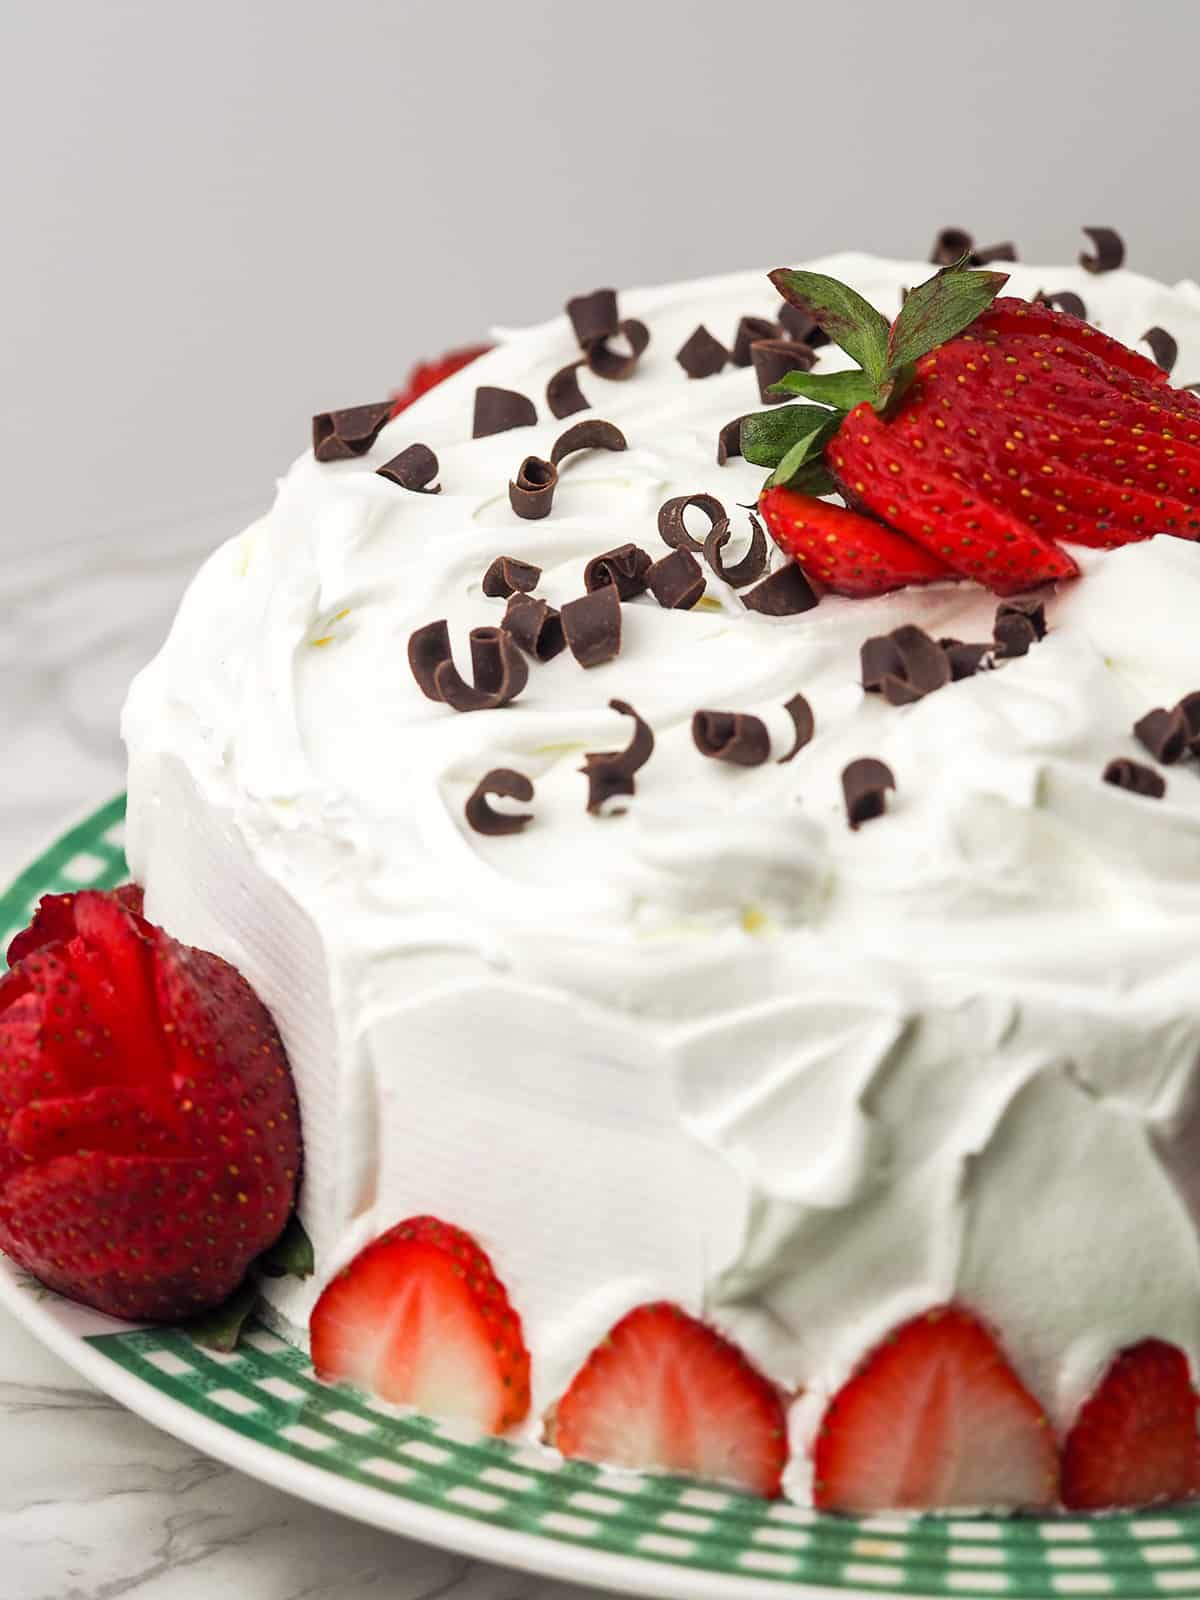 chocolate cake topped with strawberries and chocolate curls